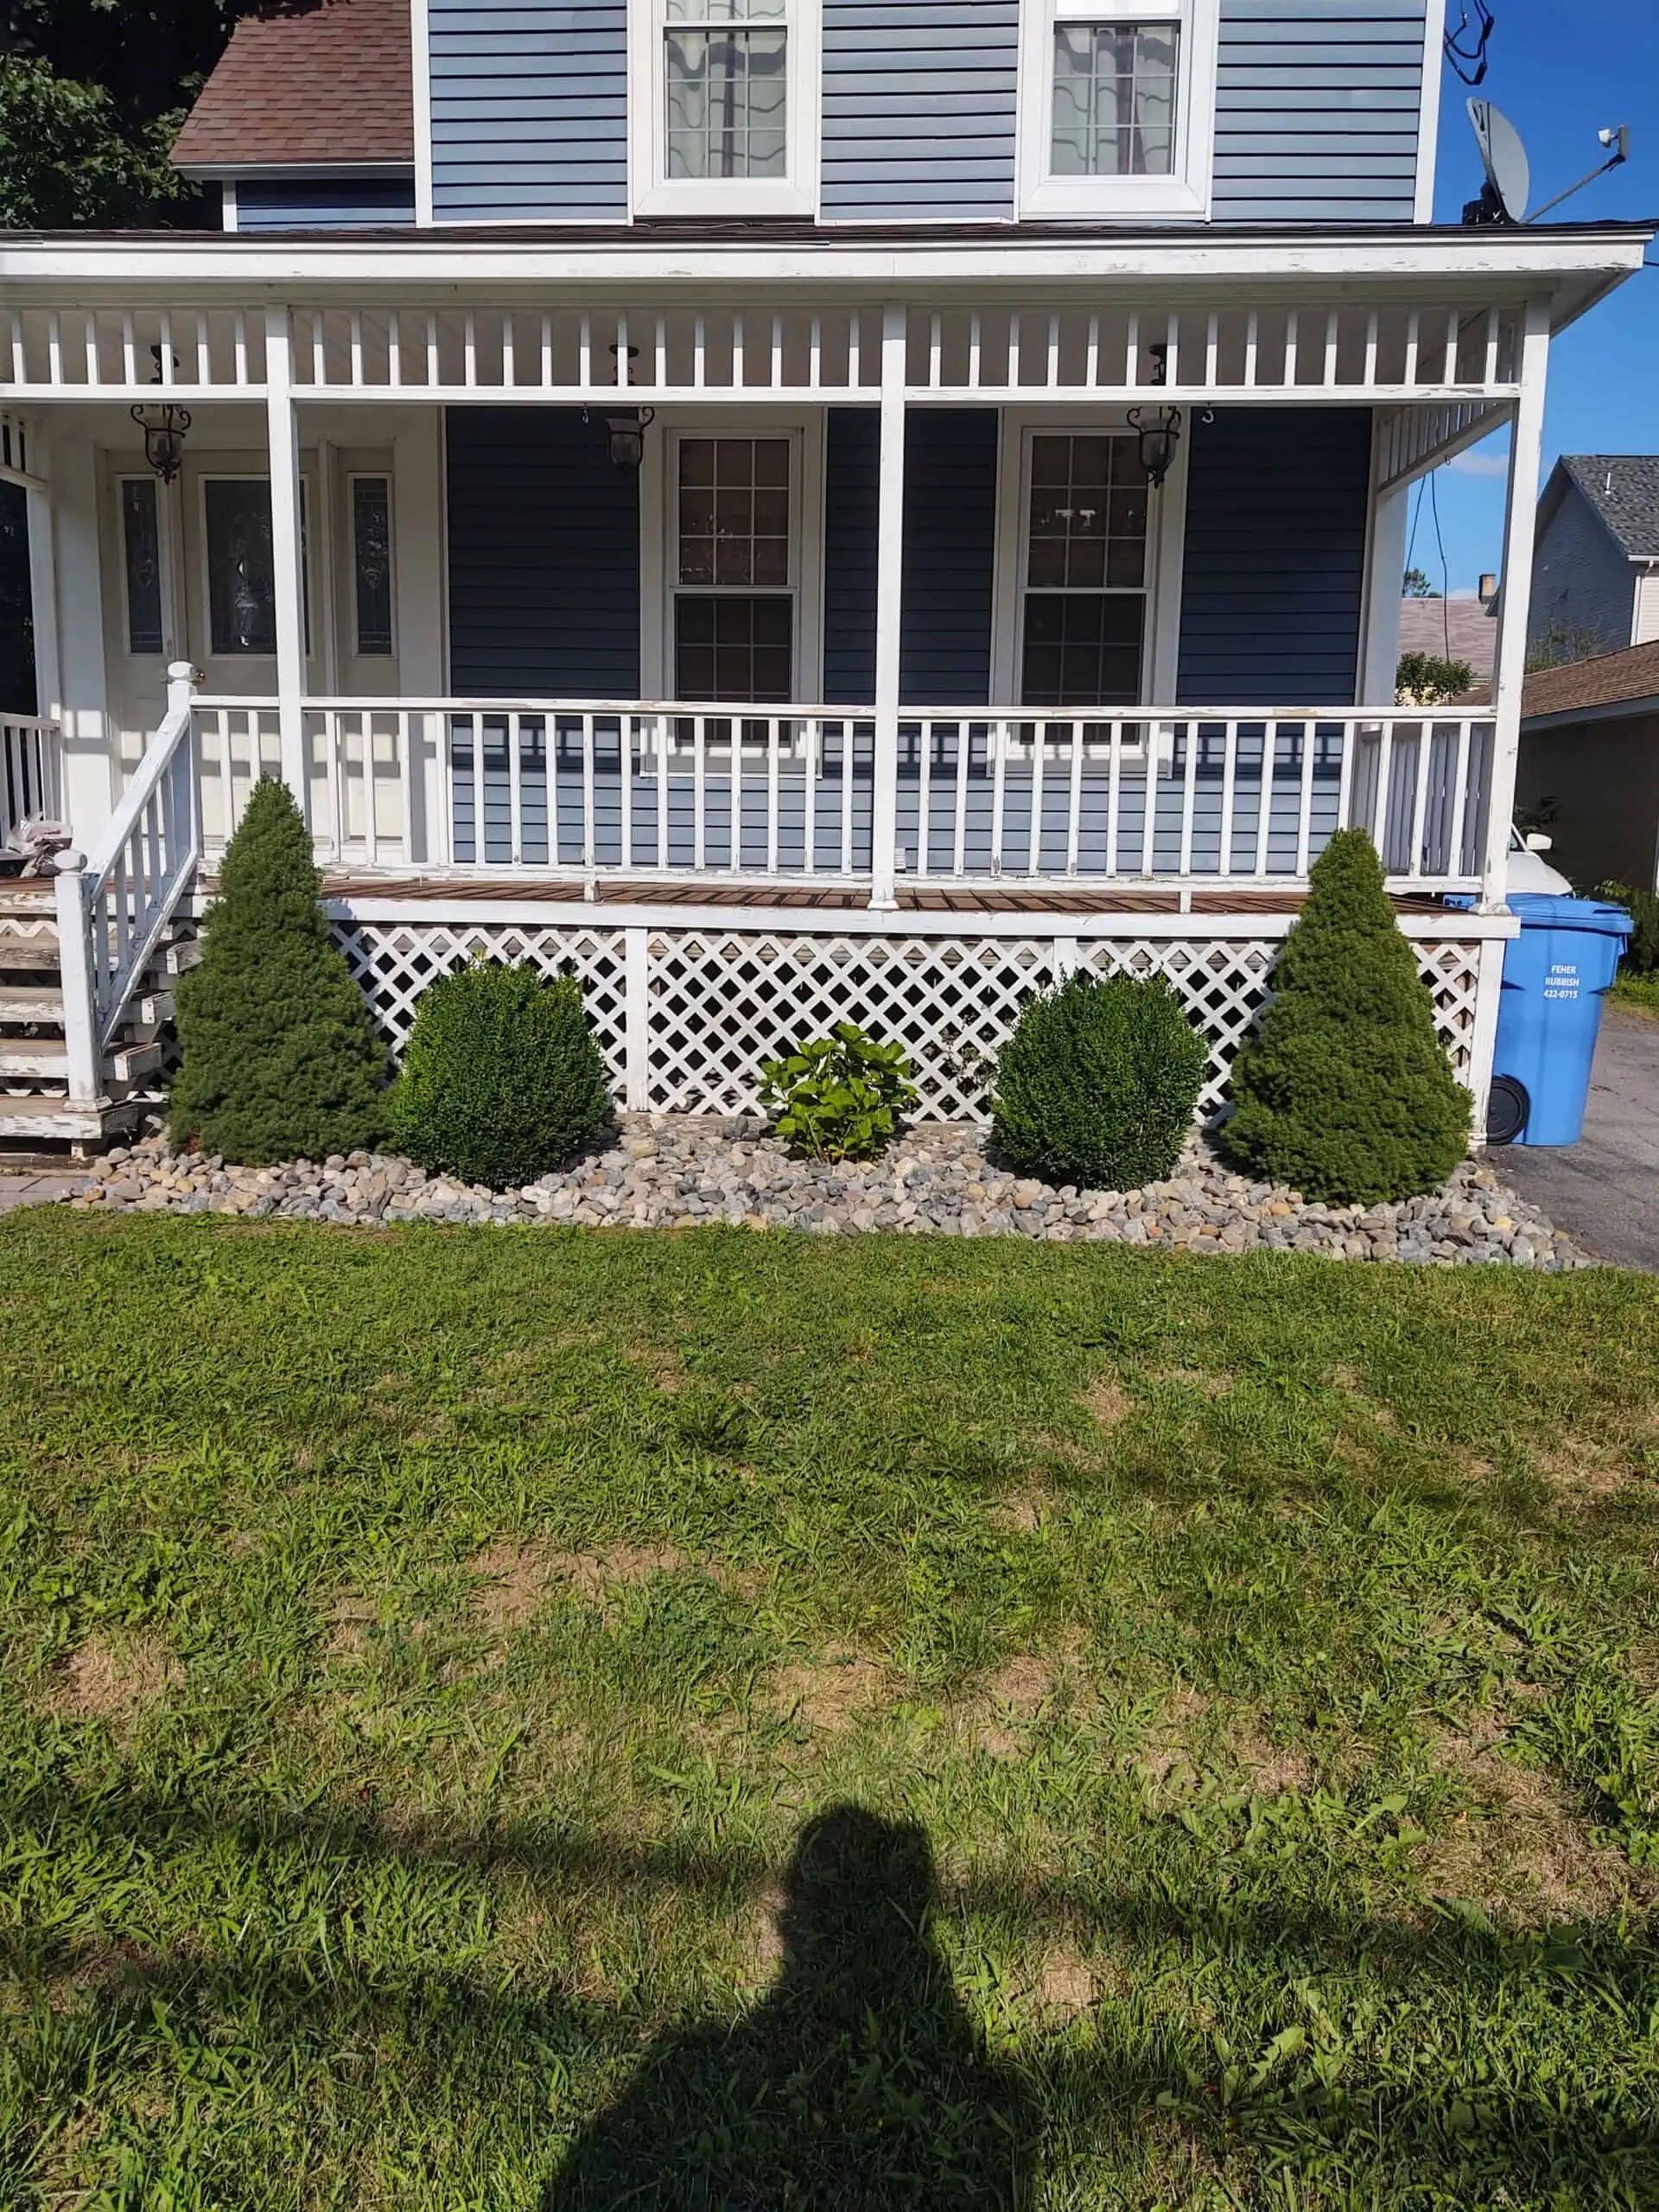 49066 scaled - Newman Landscaping & Sealcoating LLC